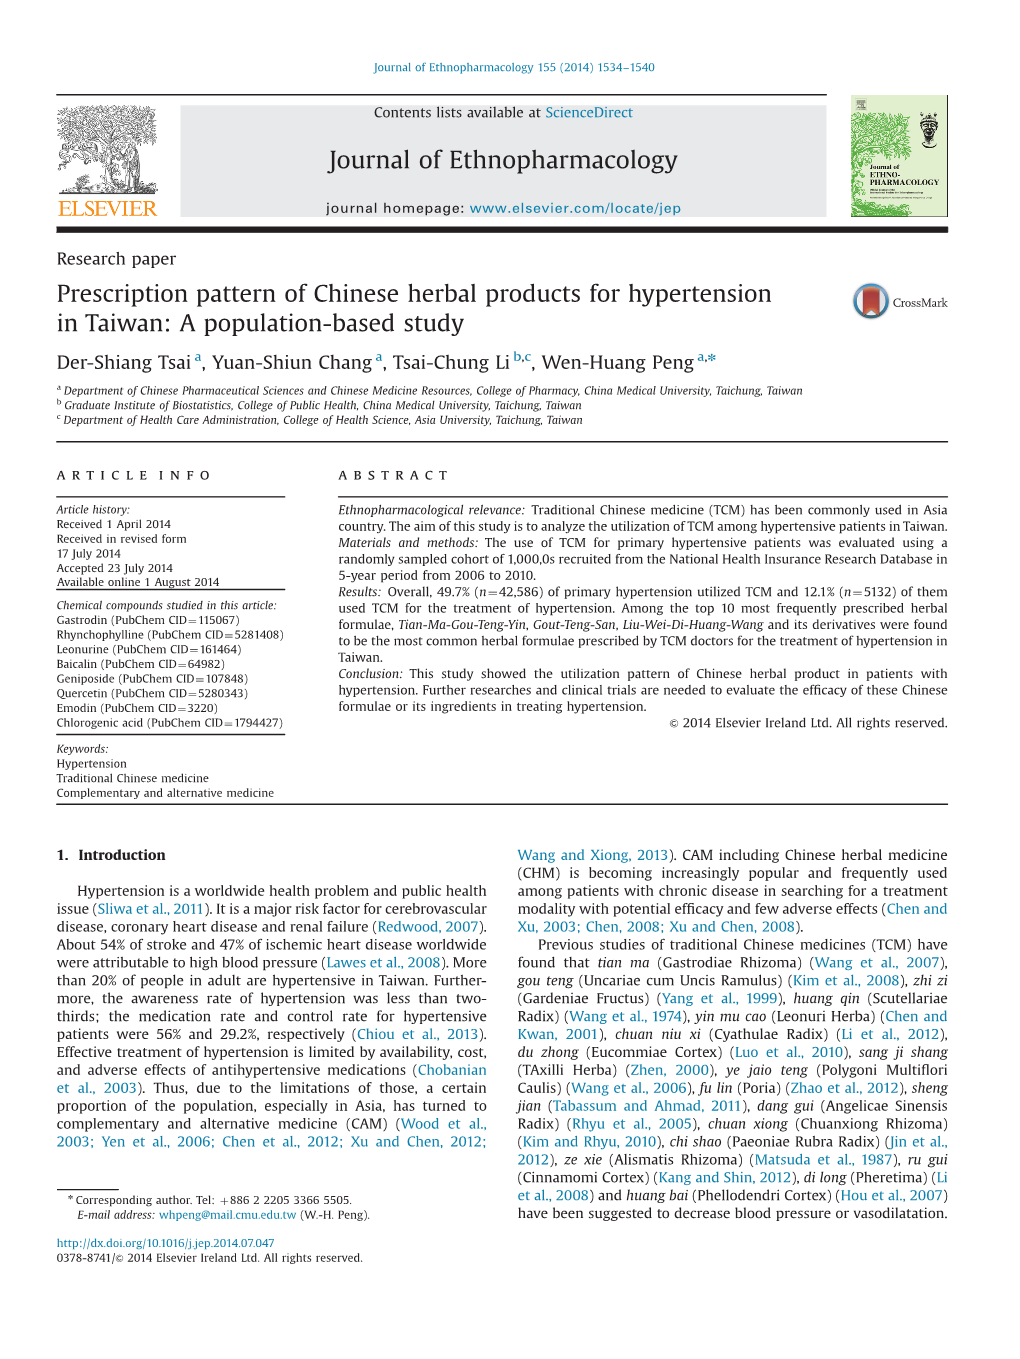 Prescription Pattern of Chinese Herbal Products for Hypertension in Taiwan: a Population-Based Study